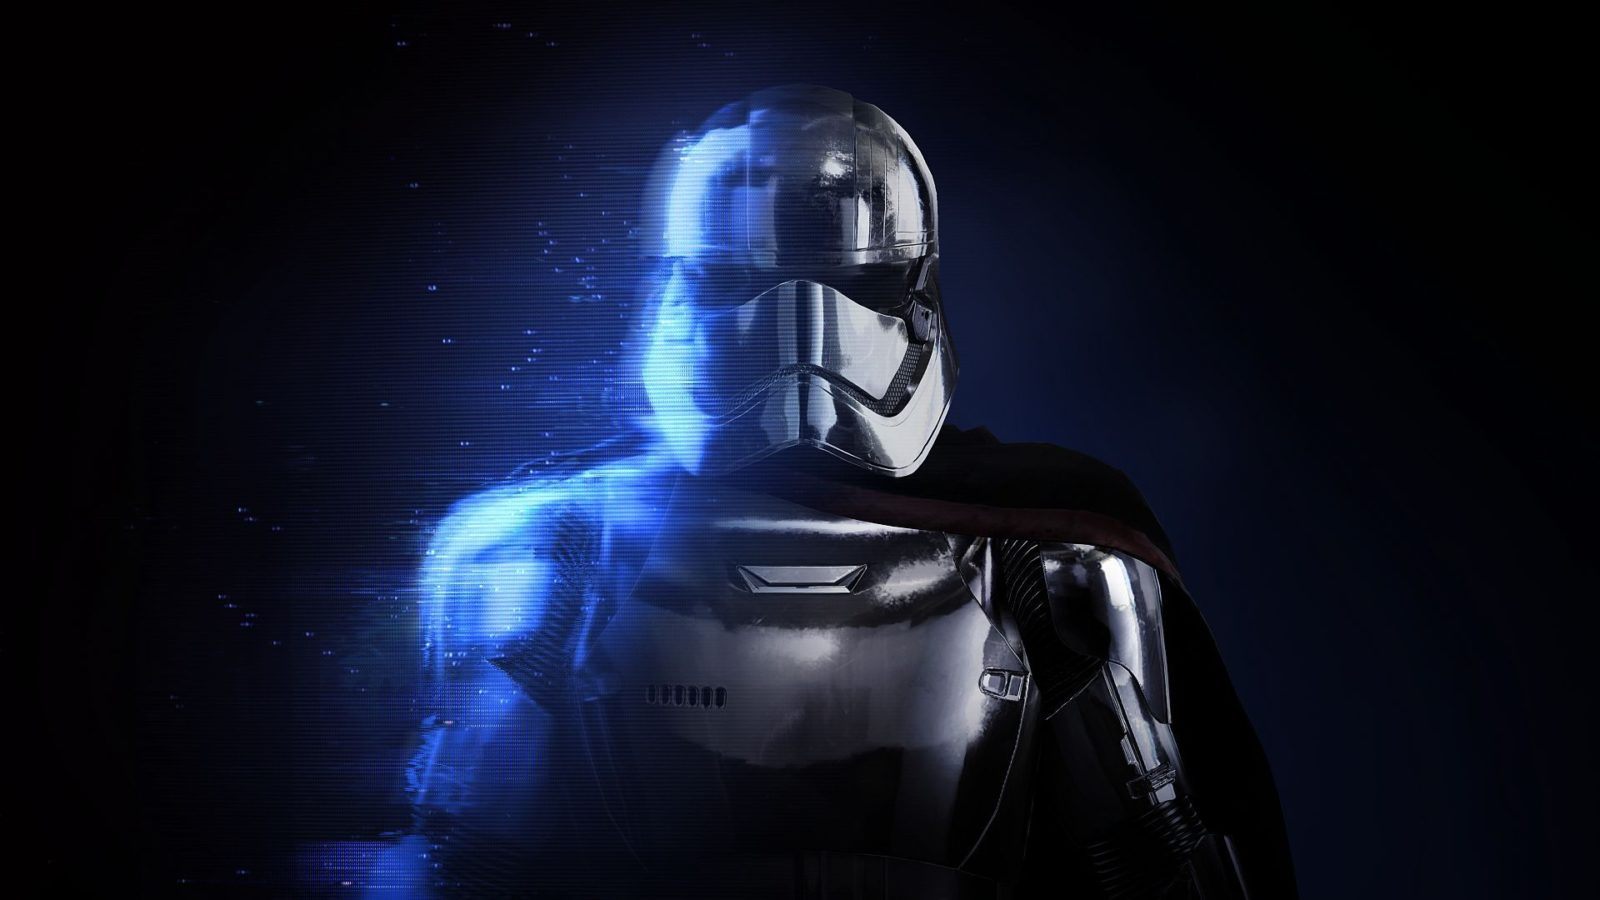 Captain Phasma Star Wars Battlefront II Wallpapers | HD Wallpapers